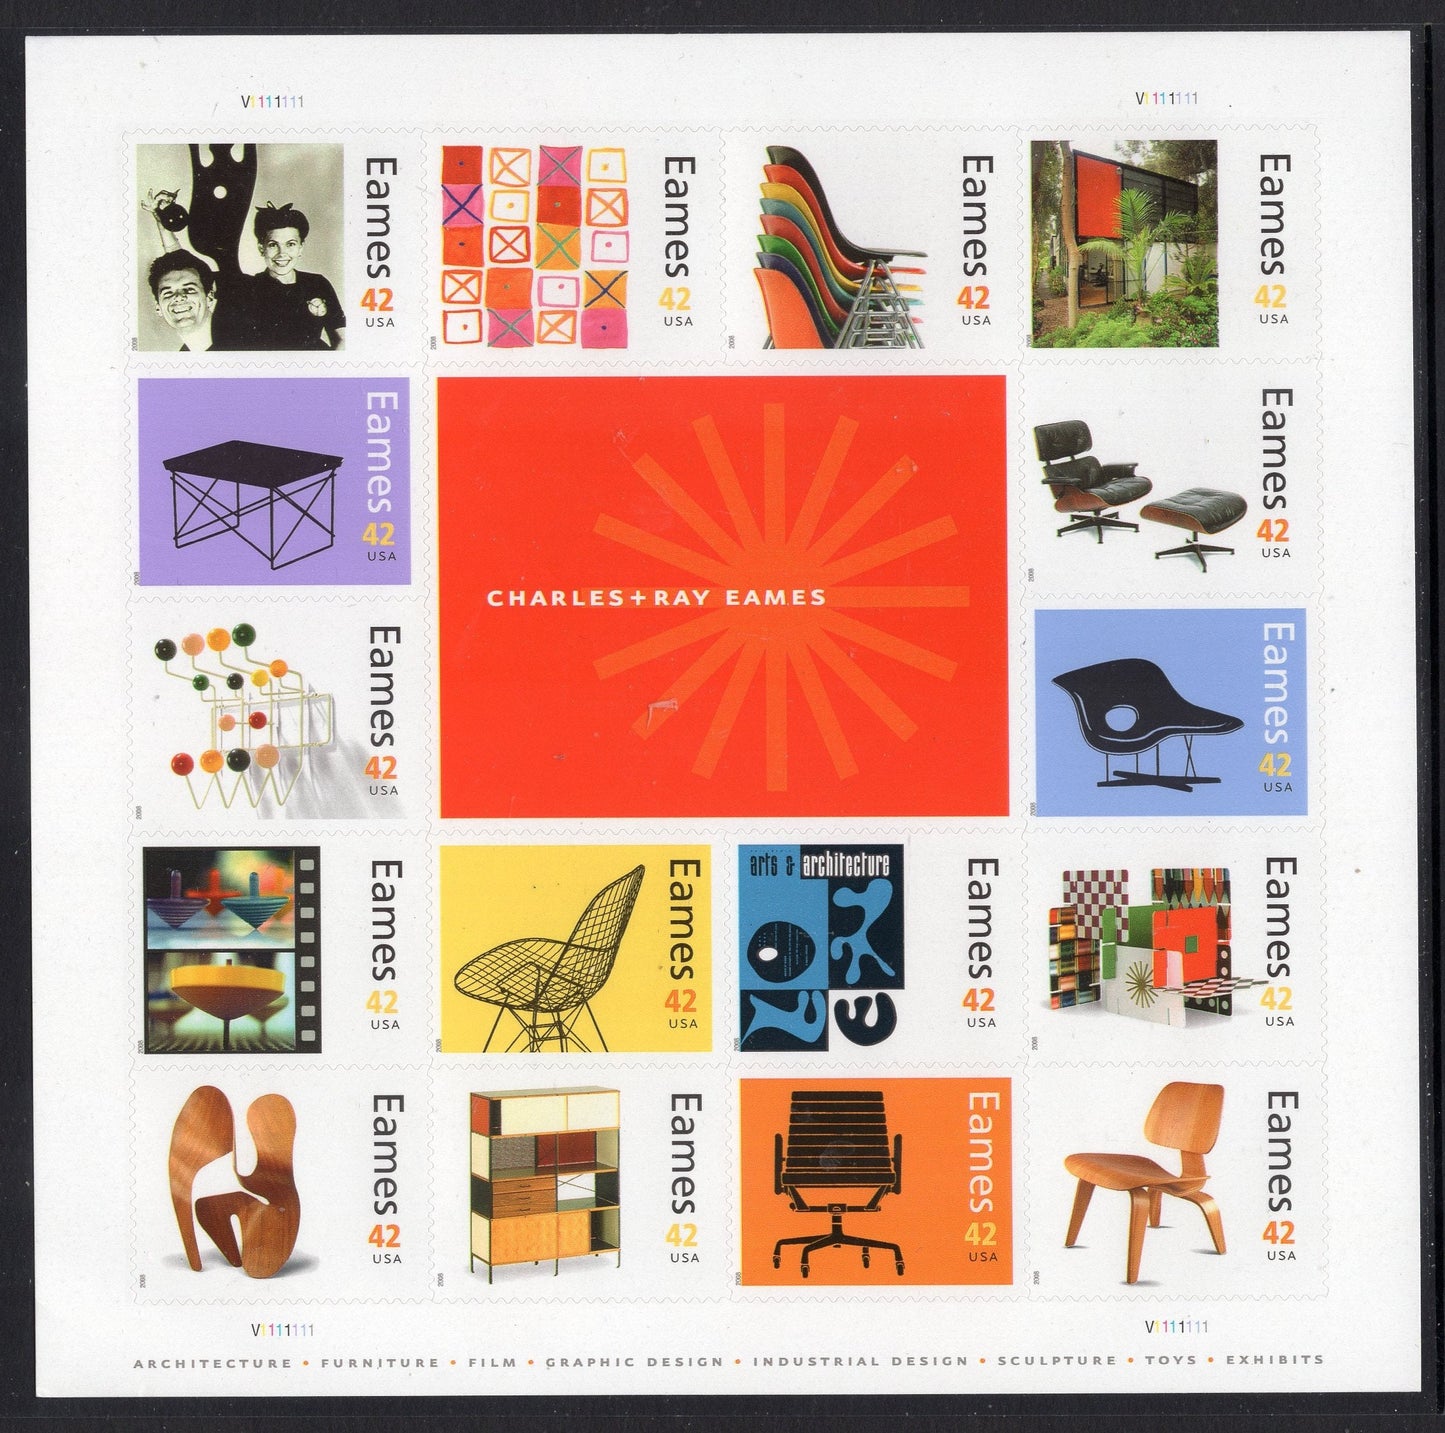 EAMES CHARLES and RAY Design Chairs Art Sheet of 16 Bright Unused USA Postage Stamps - Issued in 2008 - s4333SH -